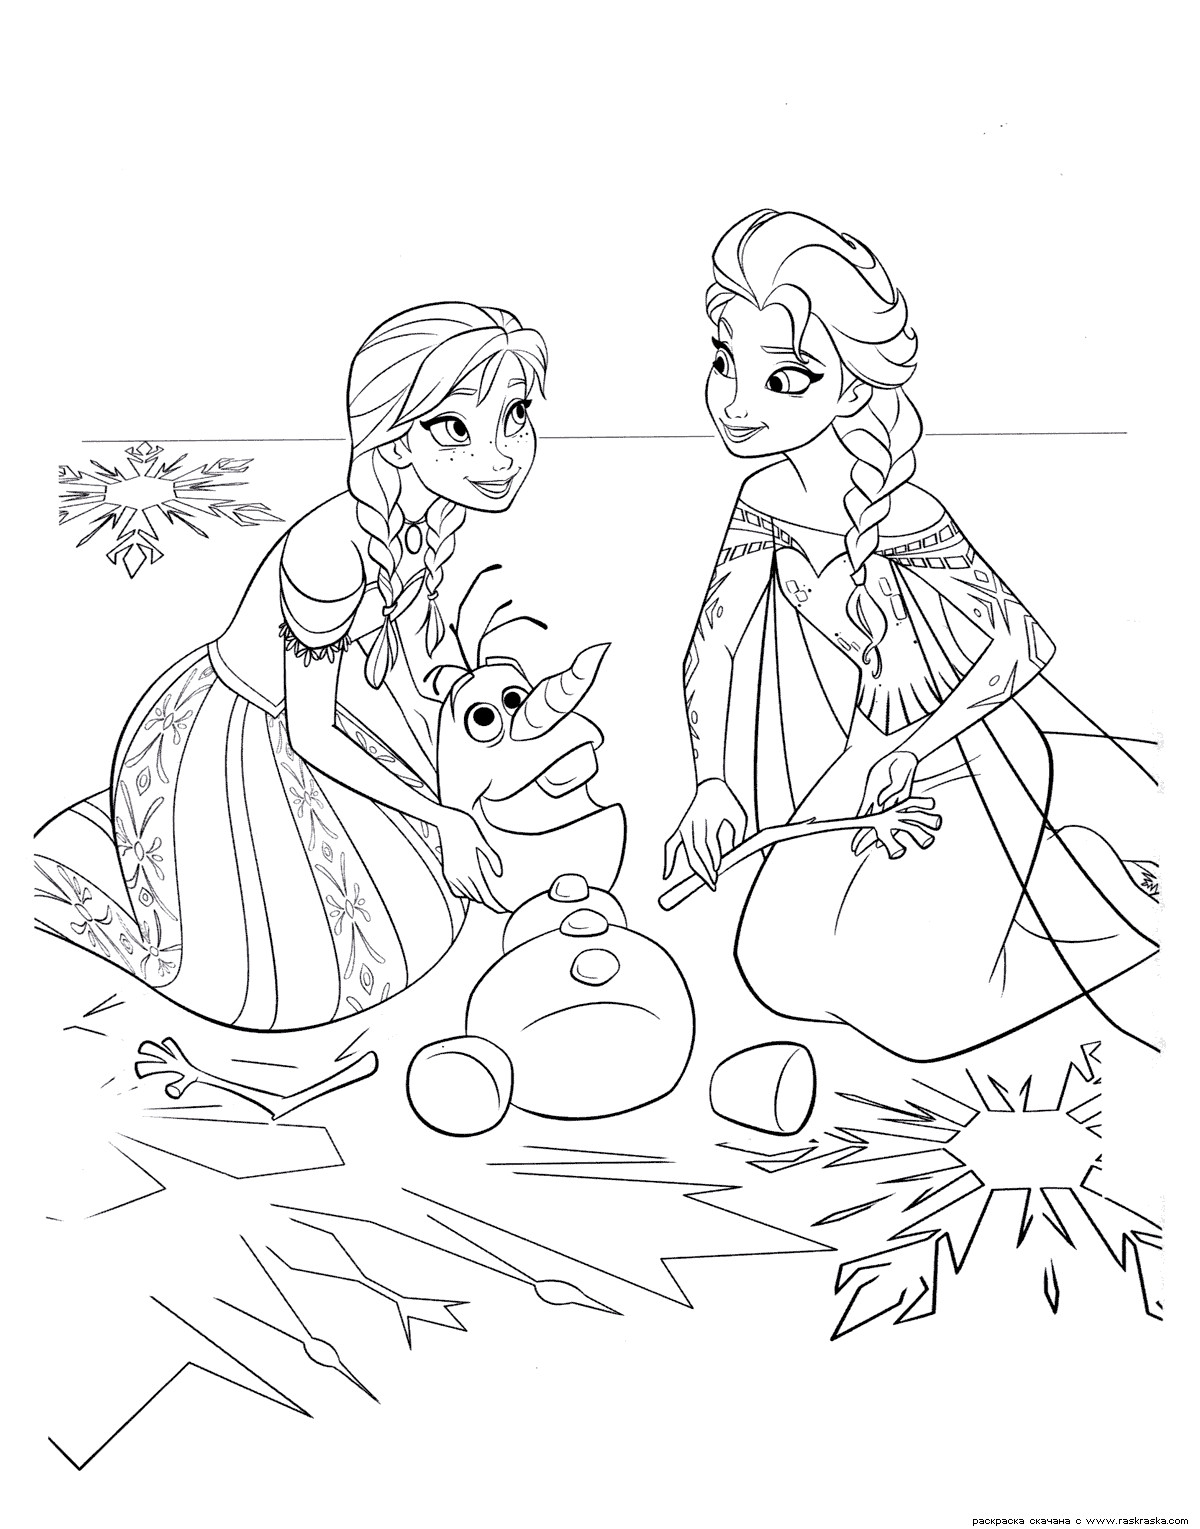 Frozen Coloring Pages Free Printable
 Frozen coloring pages animated film characters Elsa